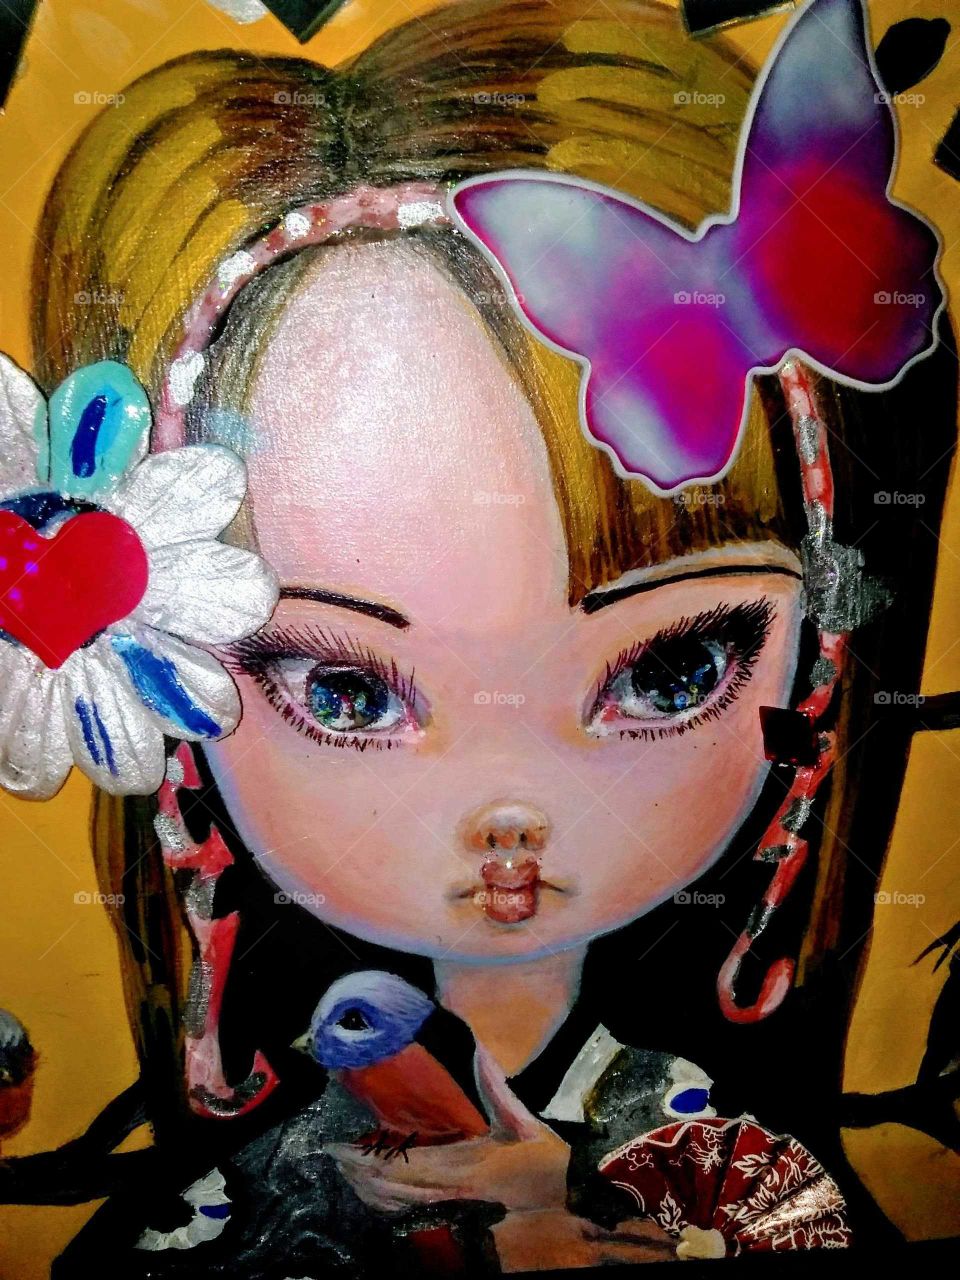 added stickers,glitter a flower and highlights etc on an already pretty painting fullface pout butterfly